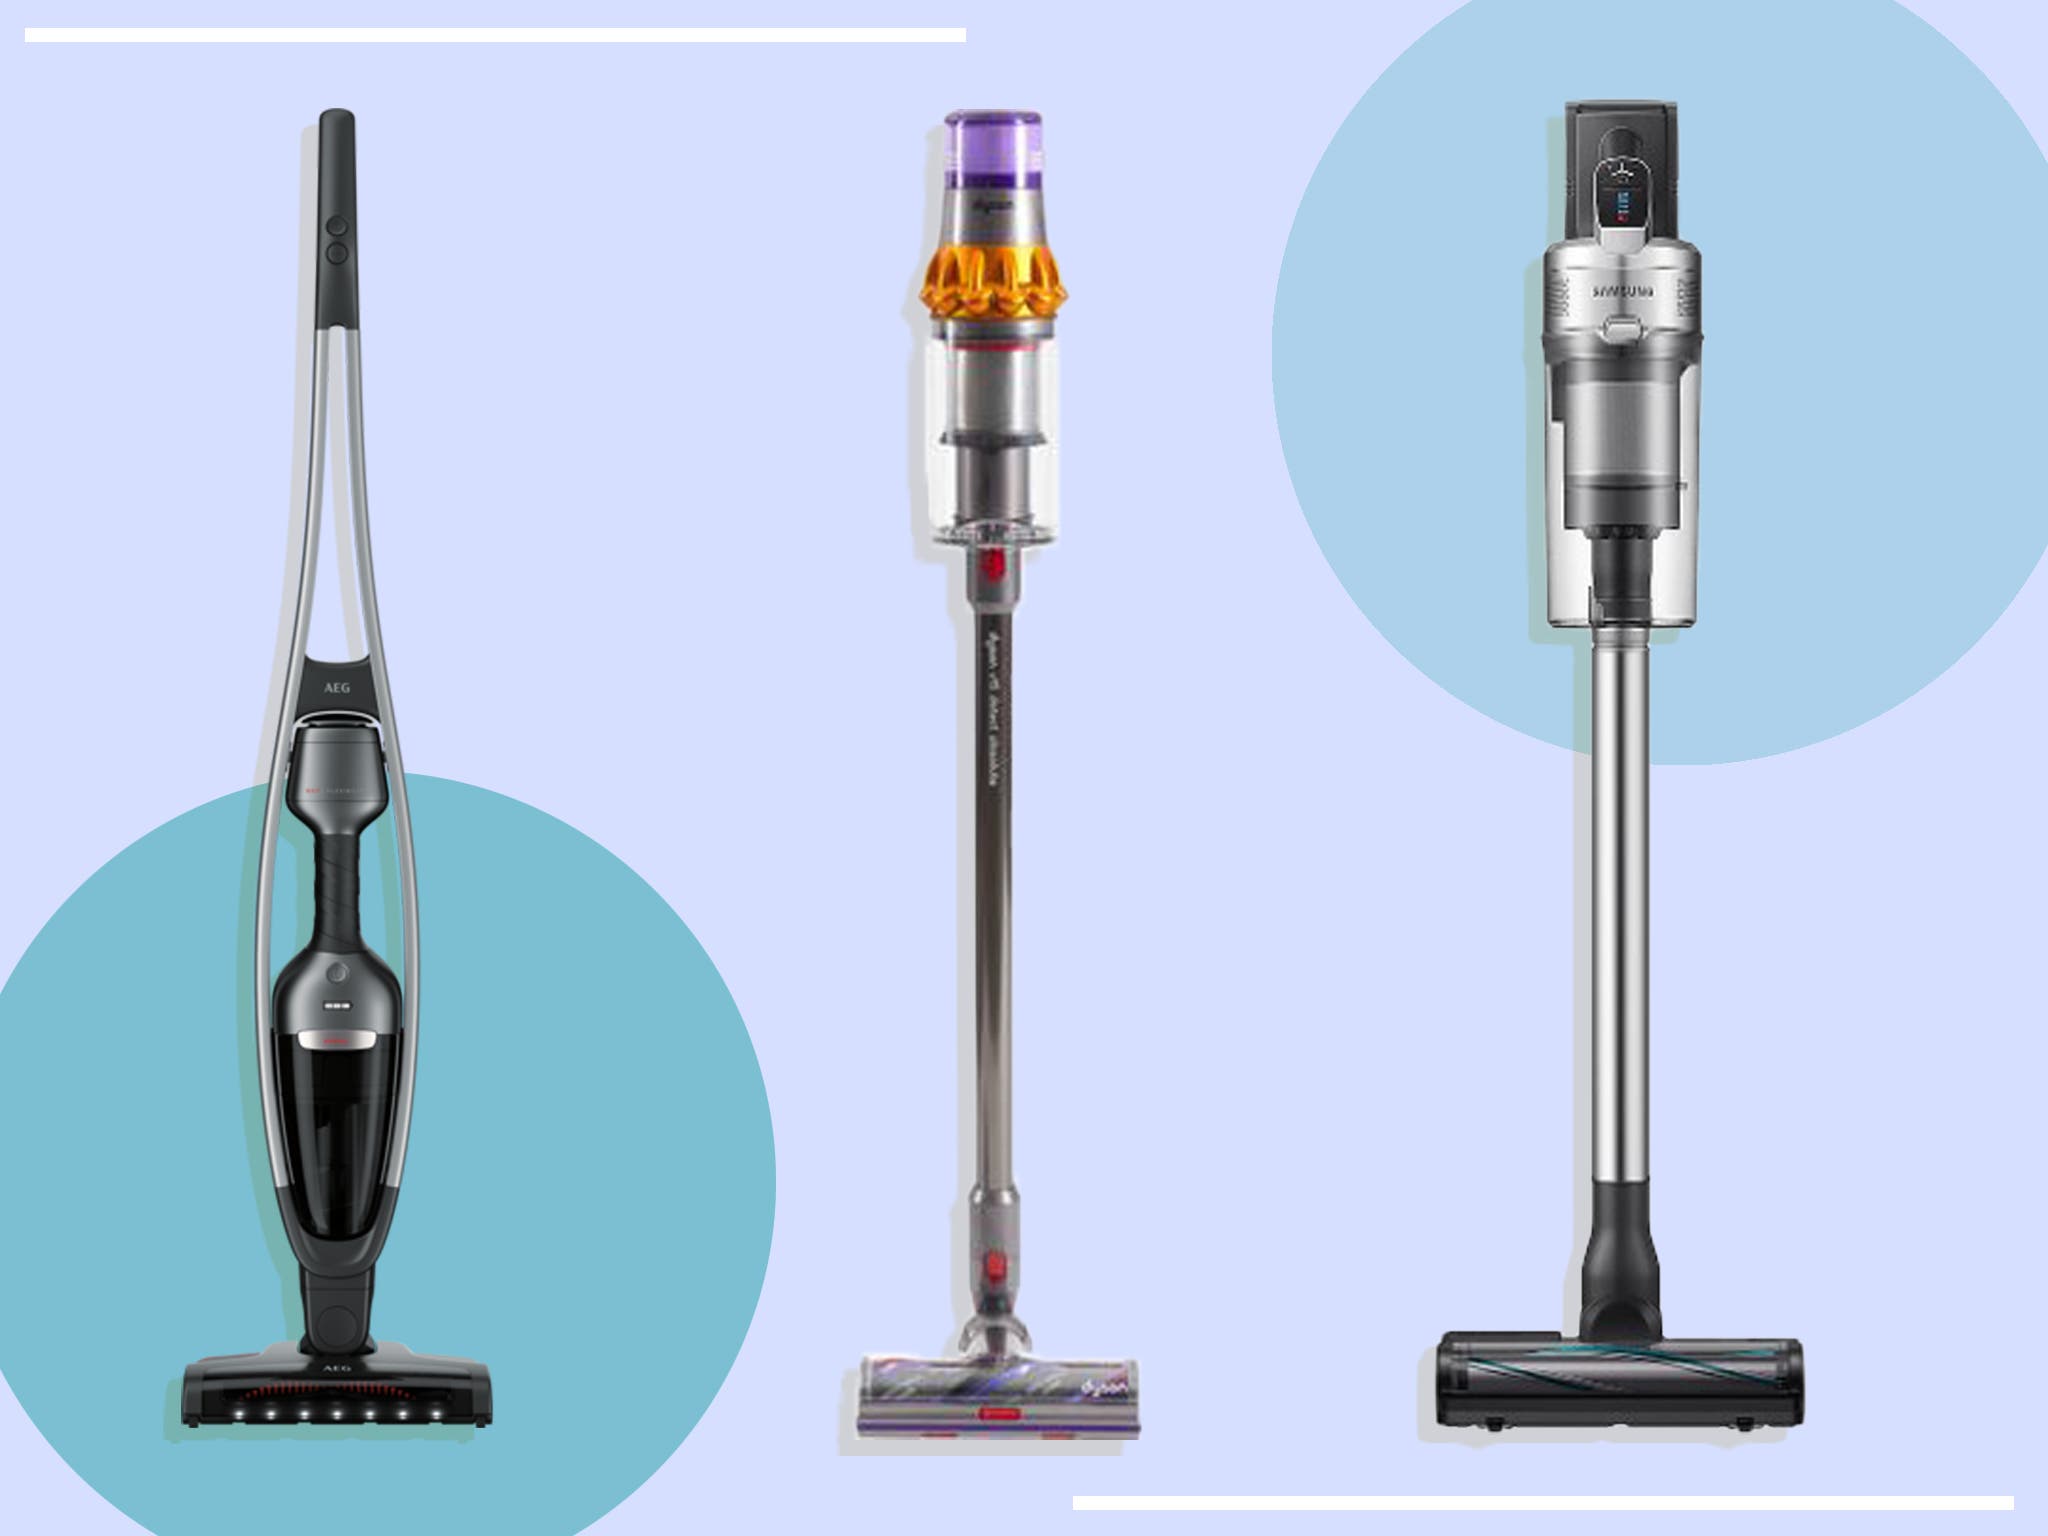 Top-rated vacuum cleaners to keep your home clean and dust-free